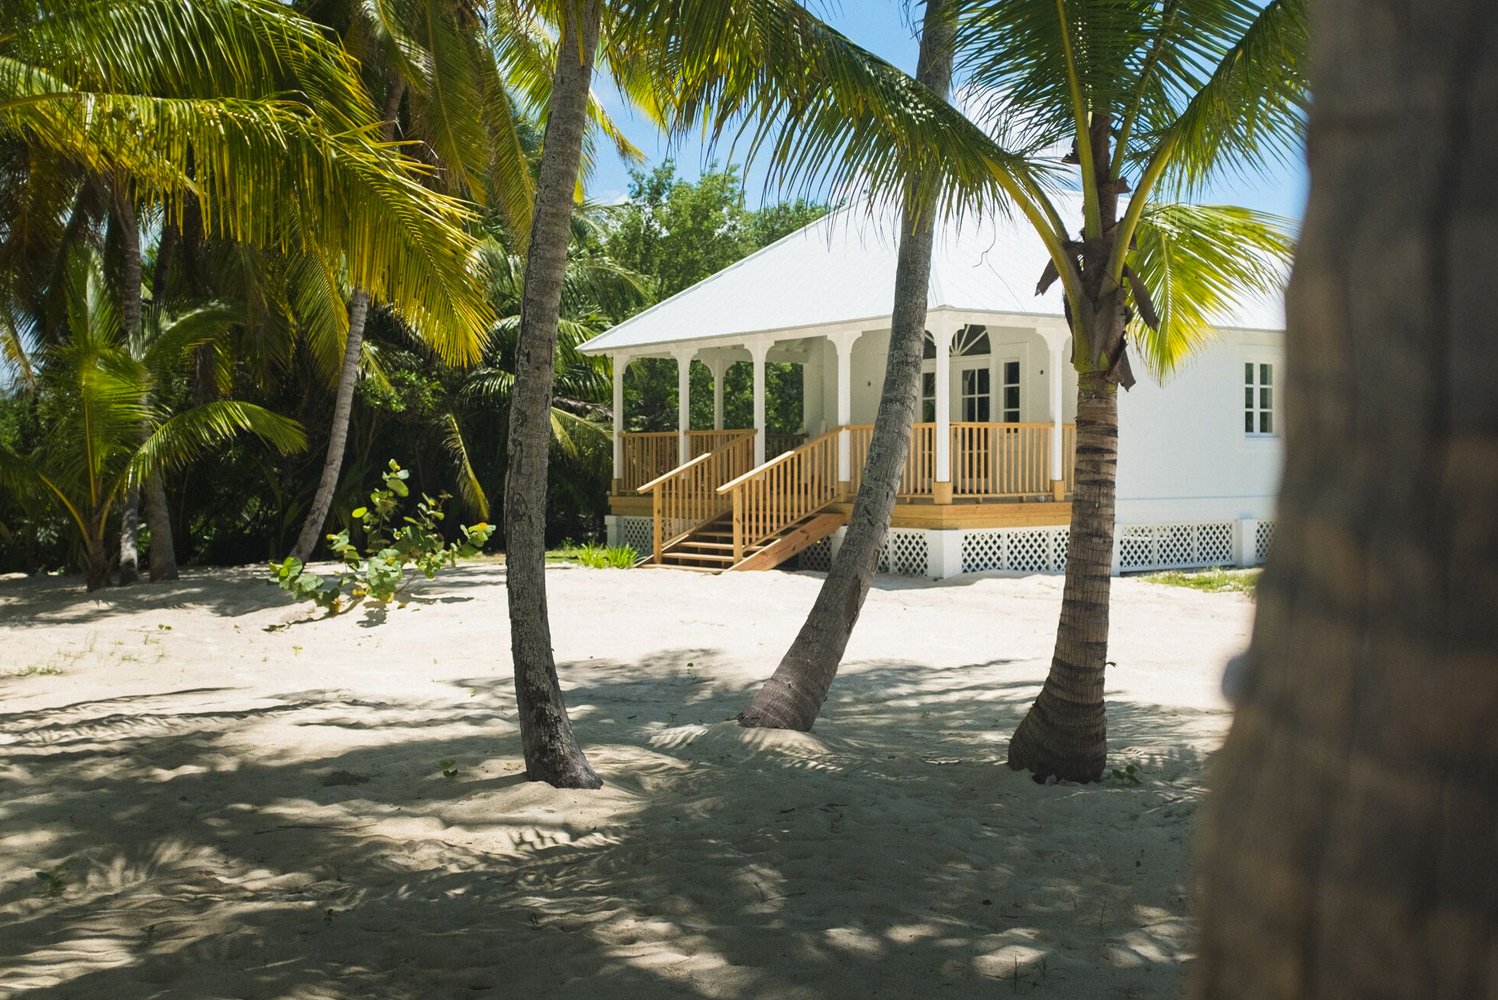 Bryan and Sarah Baeumler will open Caerula Mar Club on the island of South Andros in the Bahamas this November 